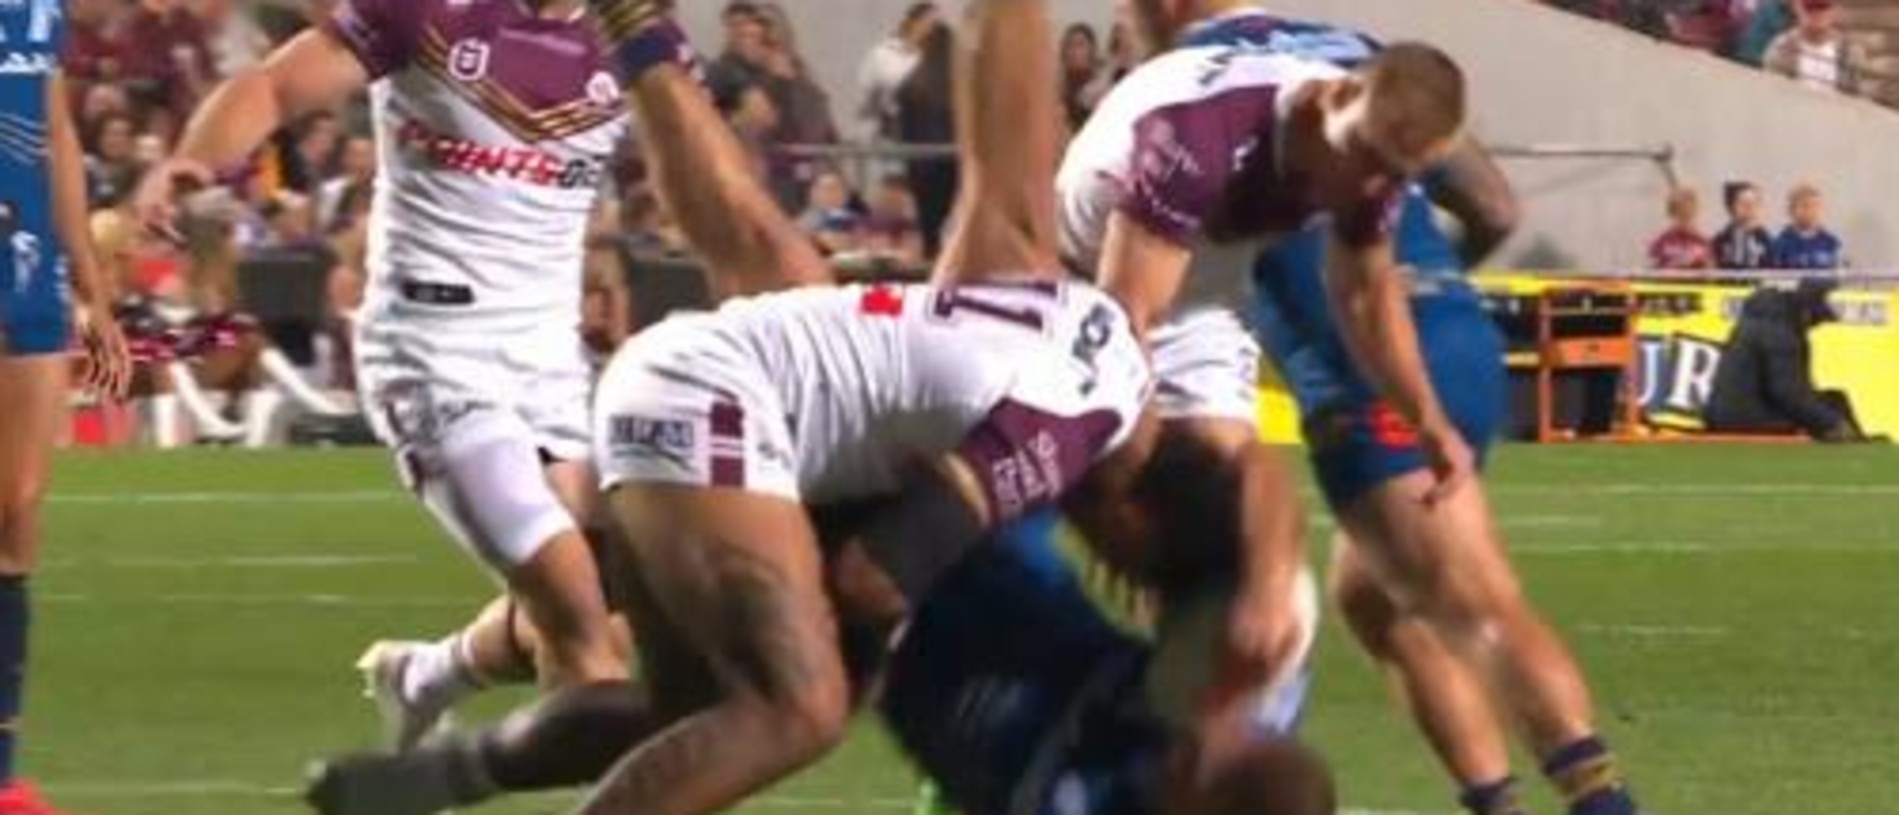 Both Sea Eagles were charged.